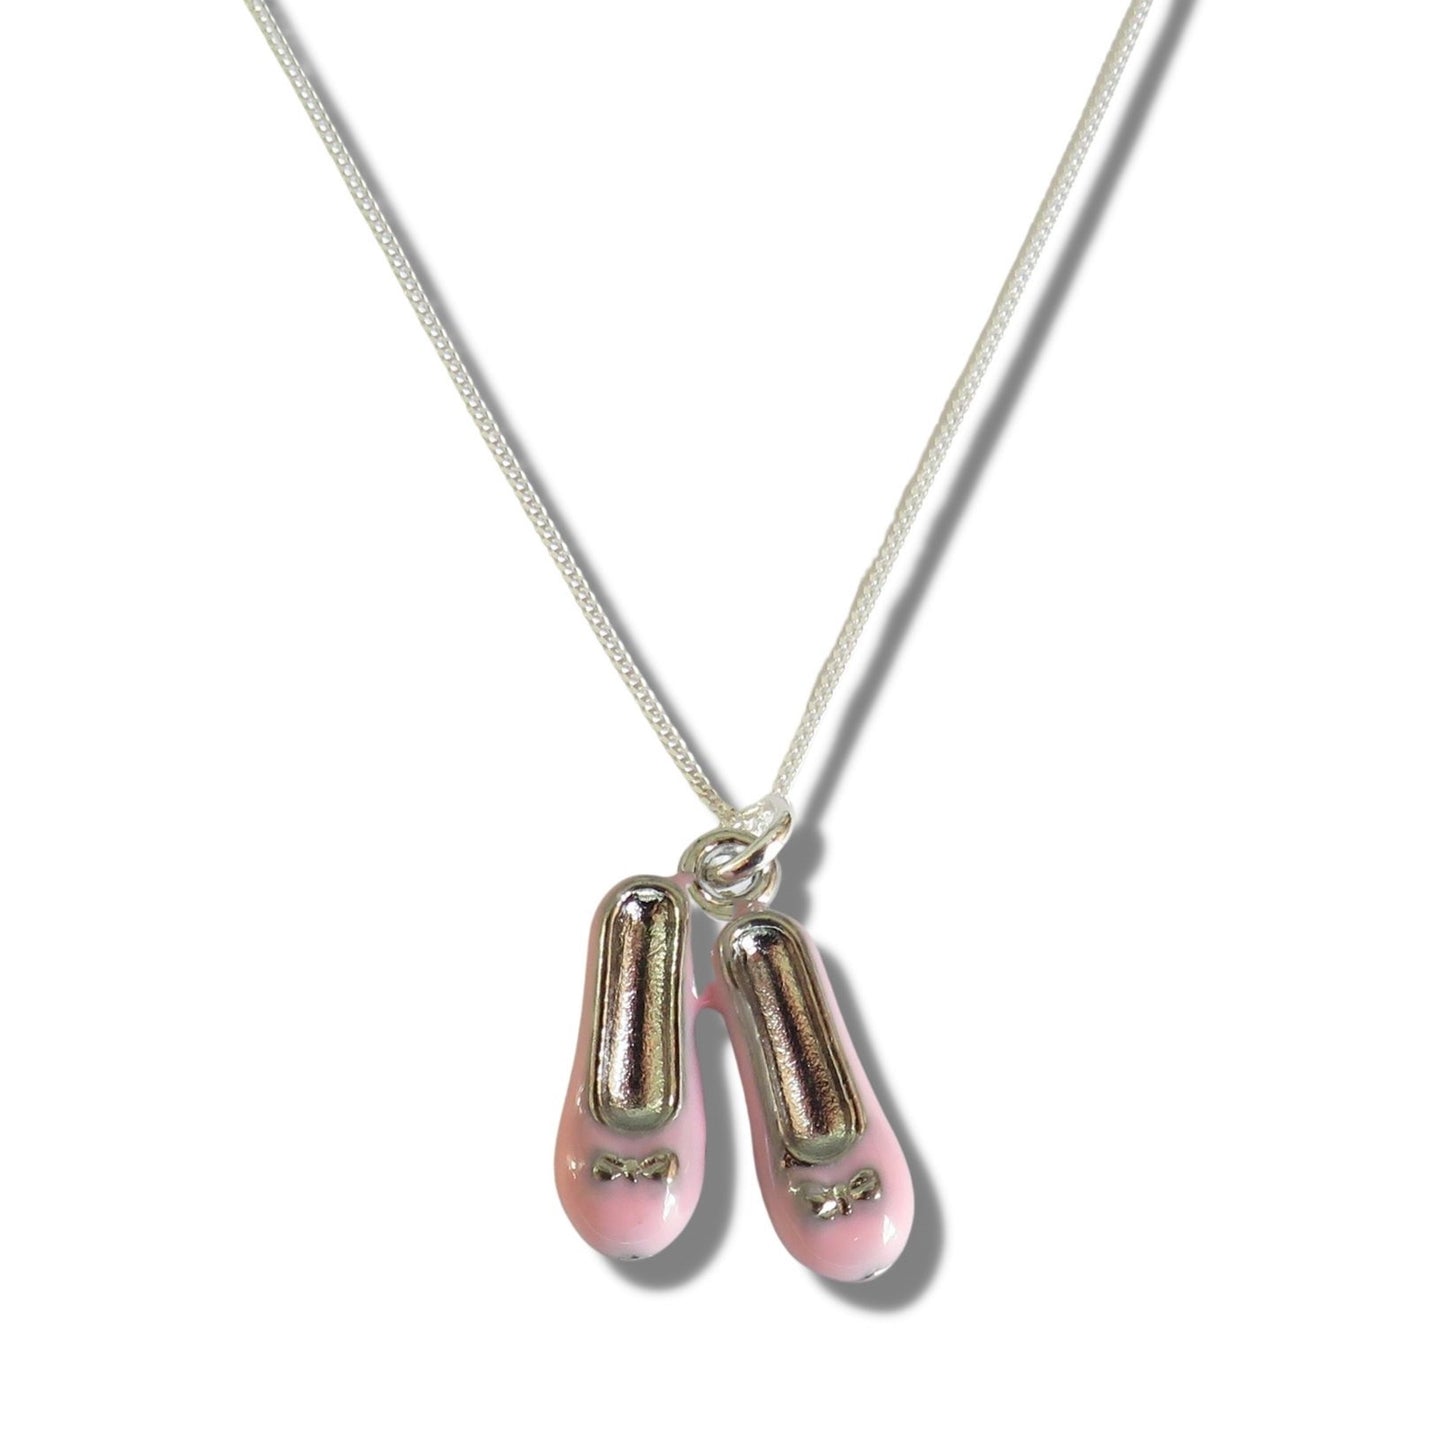 Girls Ballet Shoes Silver Necklace